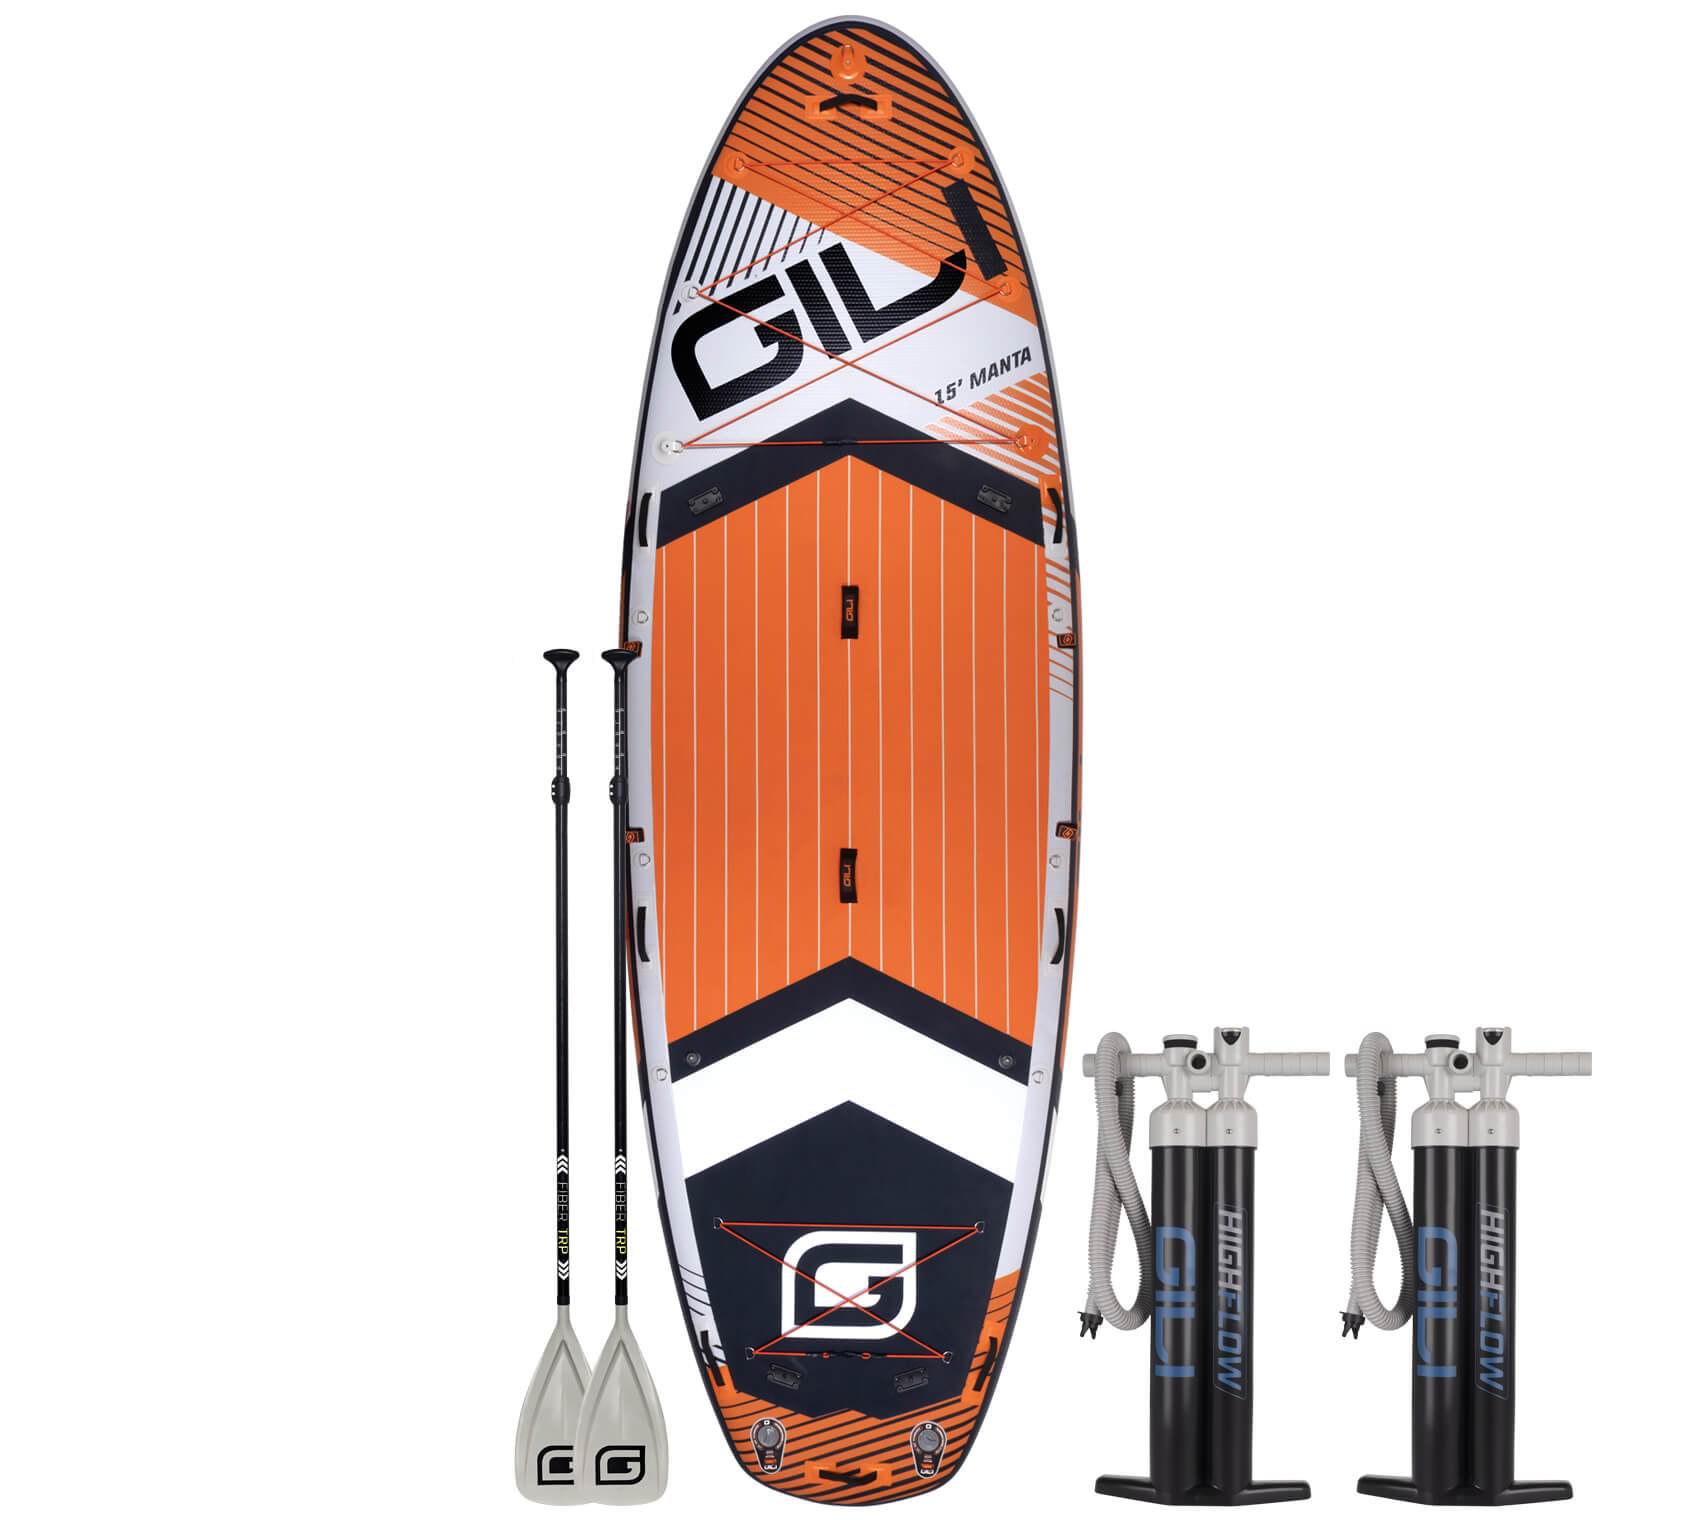 GENKI Stand Up Paddle Board 2 in1 Inflatable SUP Surfboard Kayak